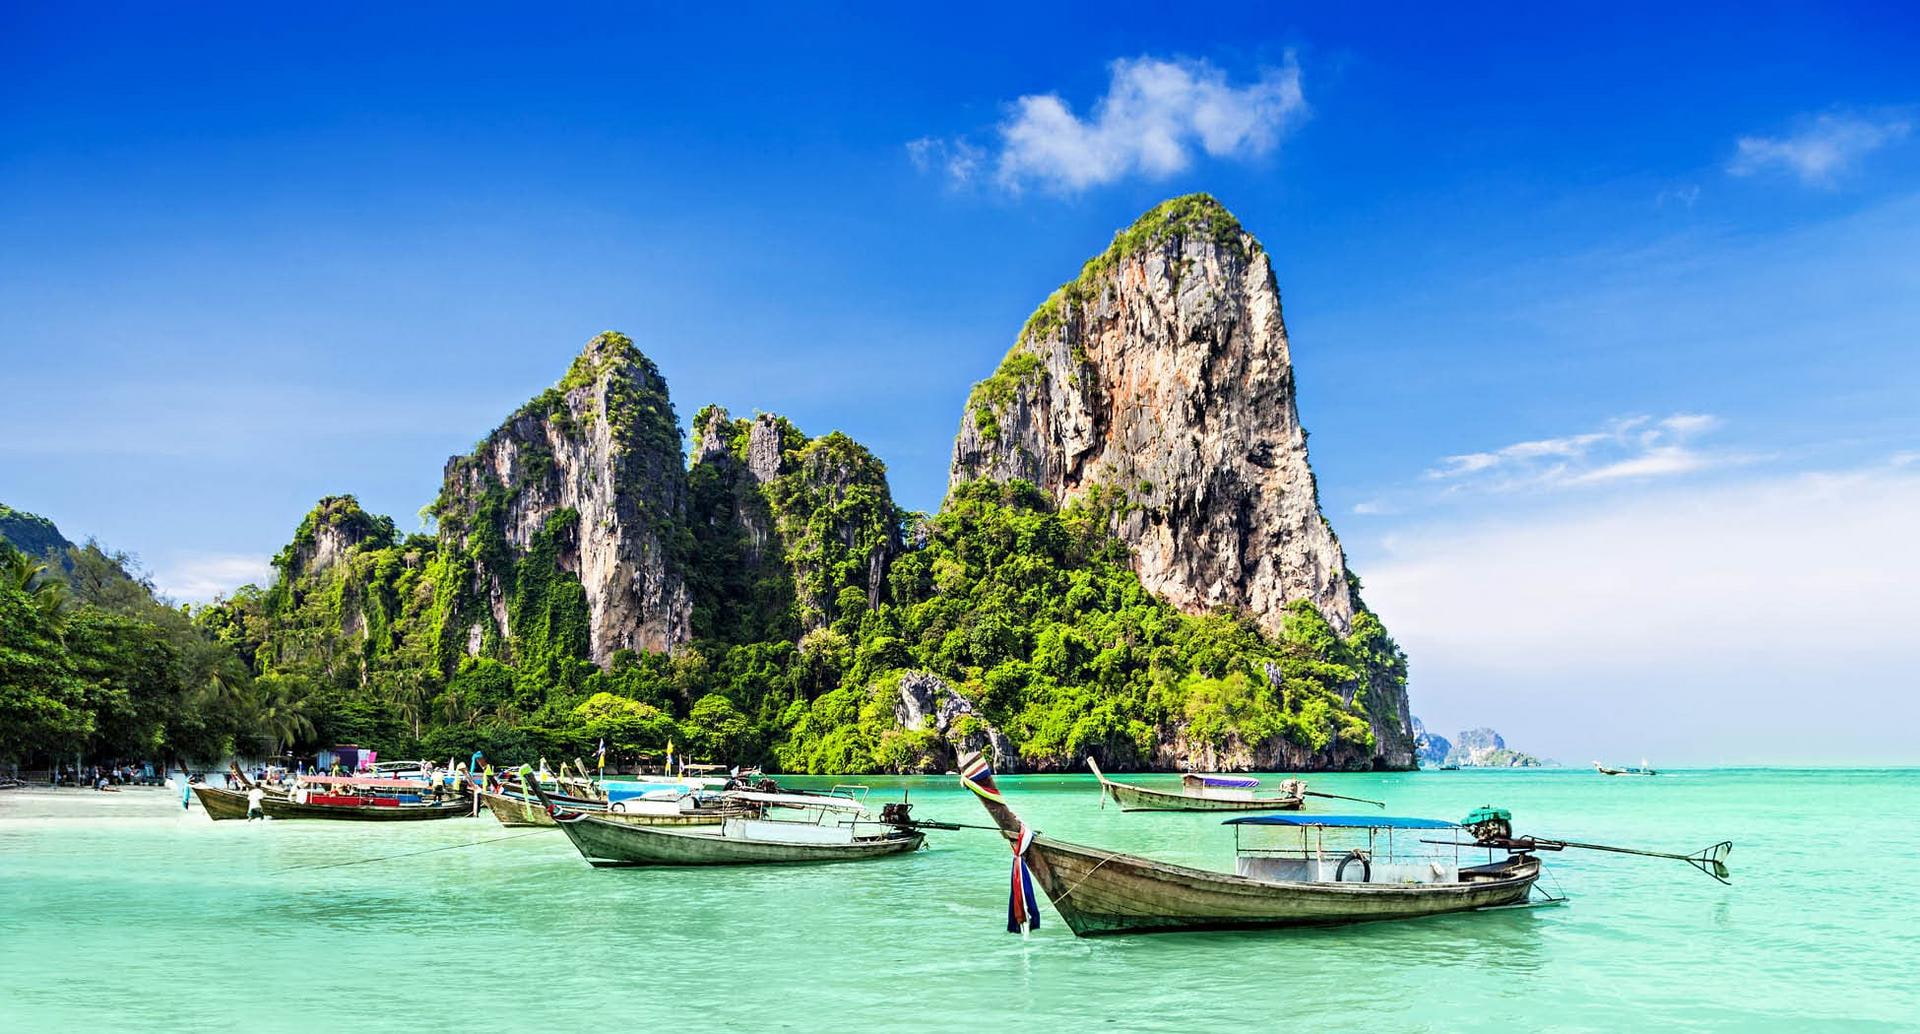 Traditionelle Boote in Thailand